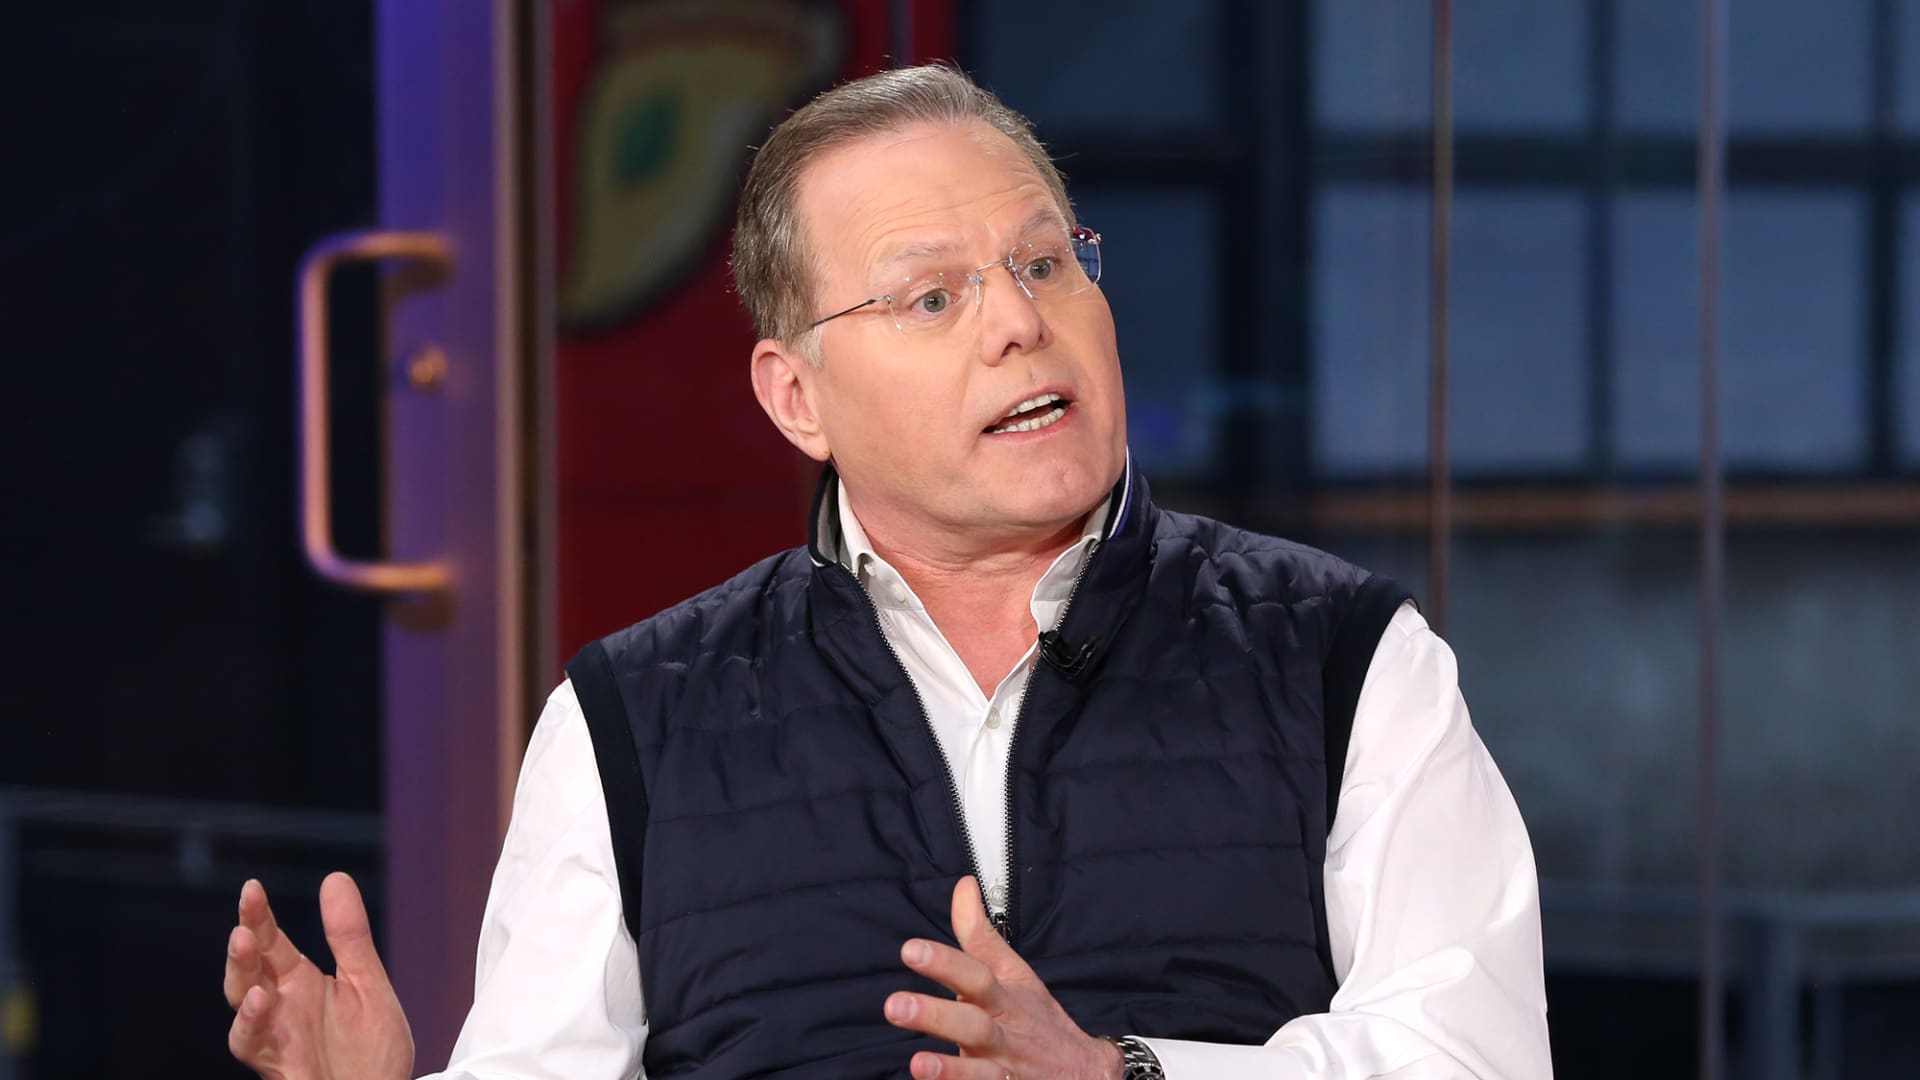 Warner Bros. Discovery CEO David Zaslav says writers, actors strikes need to end as media industry is in a transitional moment